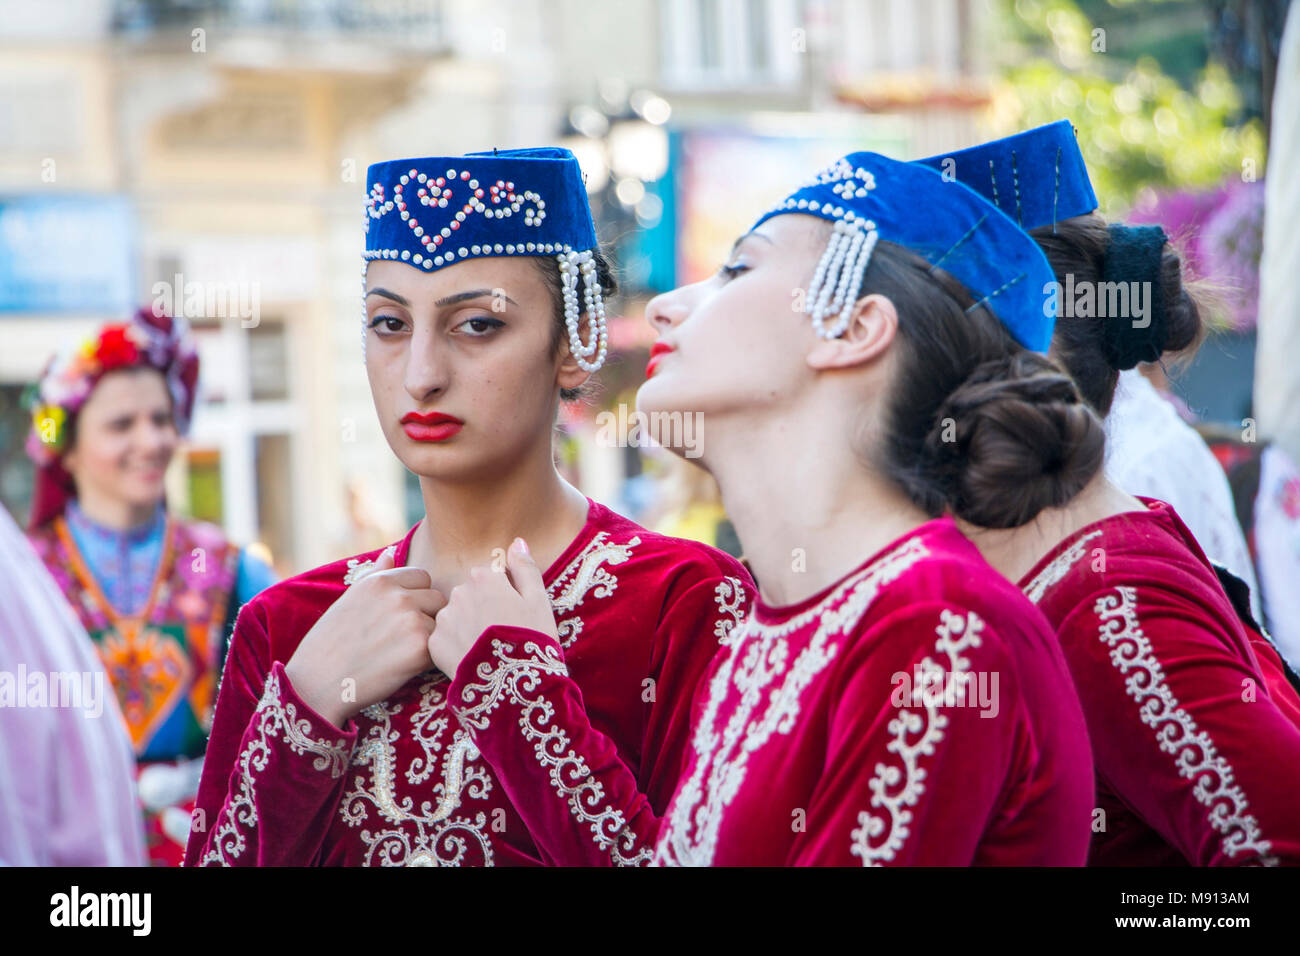 Plovdiv, Bulgaria - 3rd August 2013: Two Armenian girls in folklore costumes waiting for their performance at the XIX International Folklore Festival Stock Photo